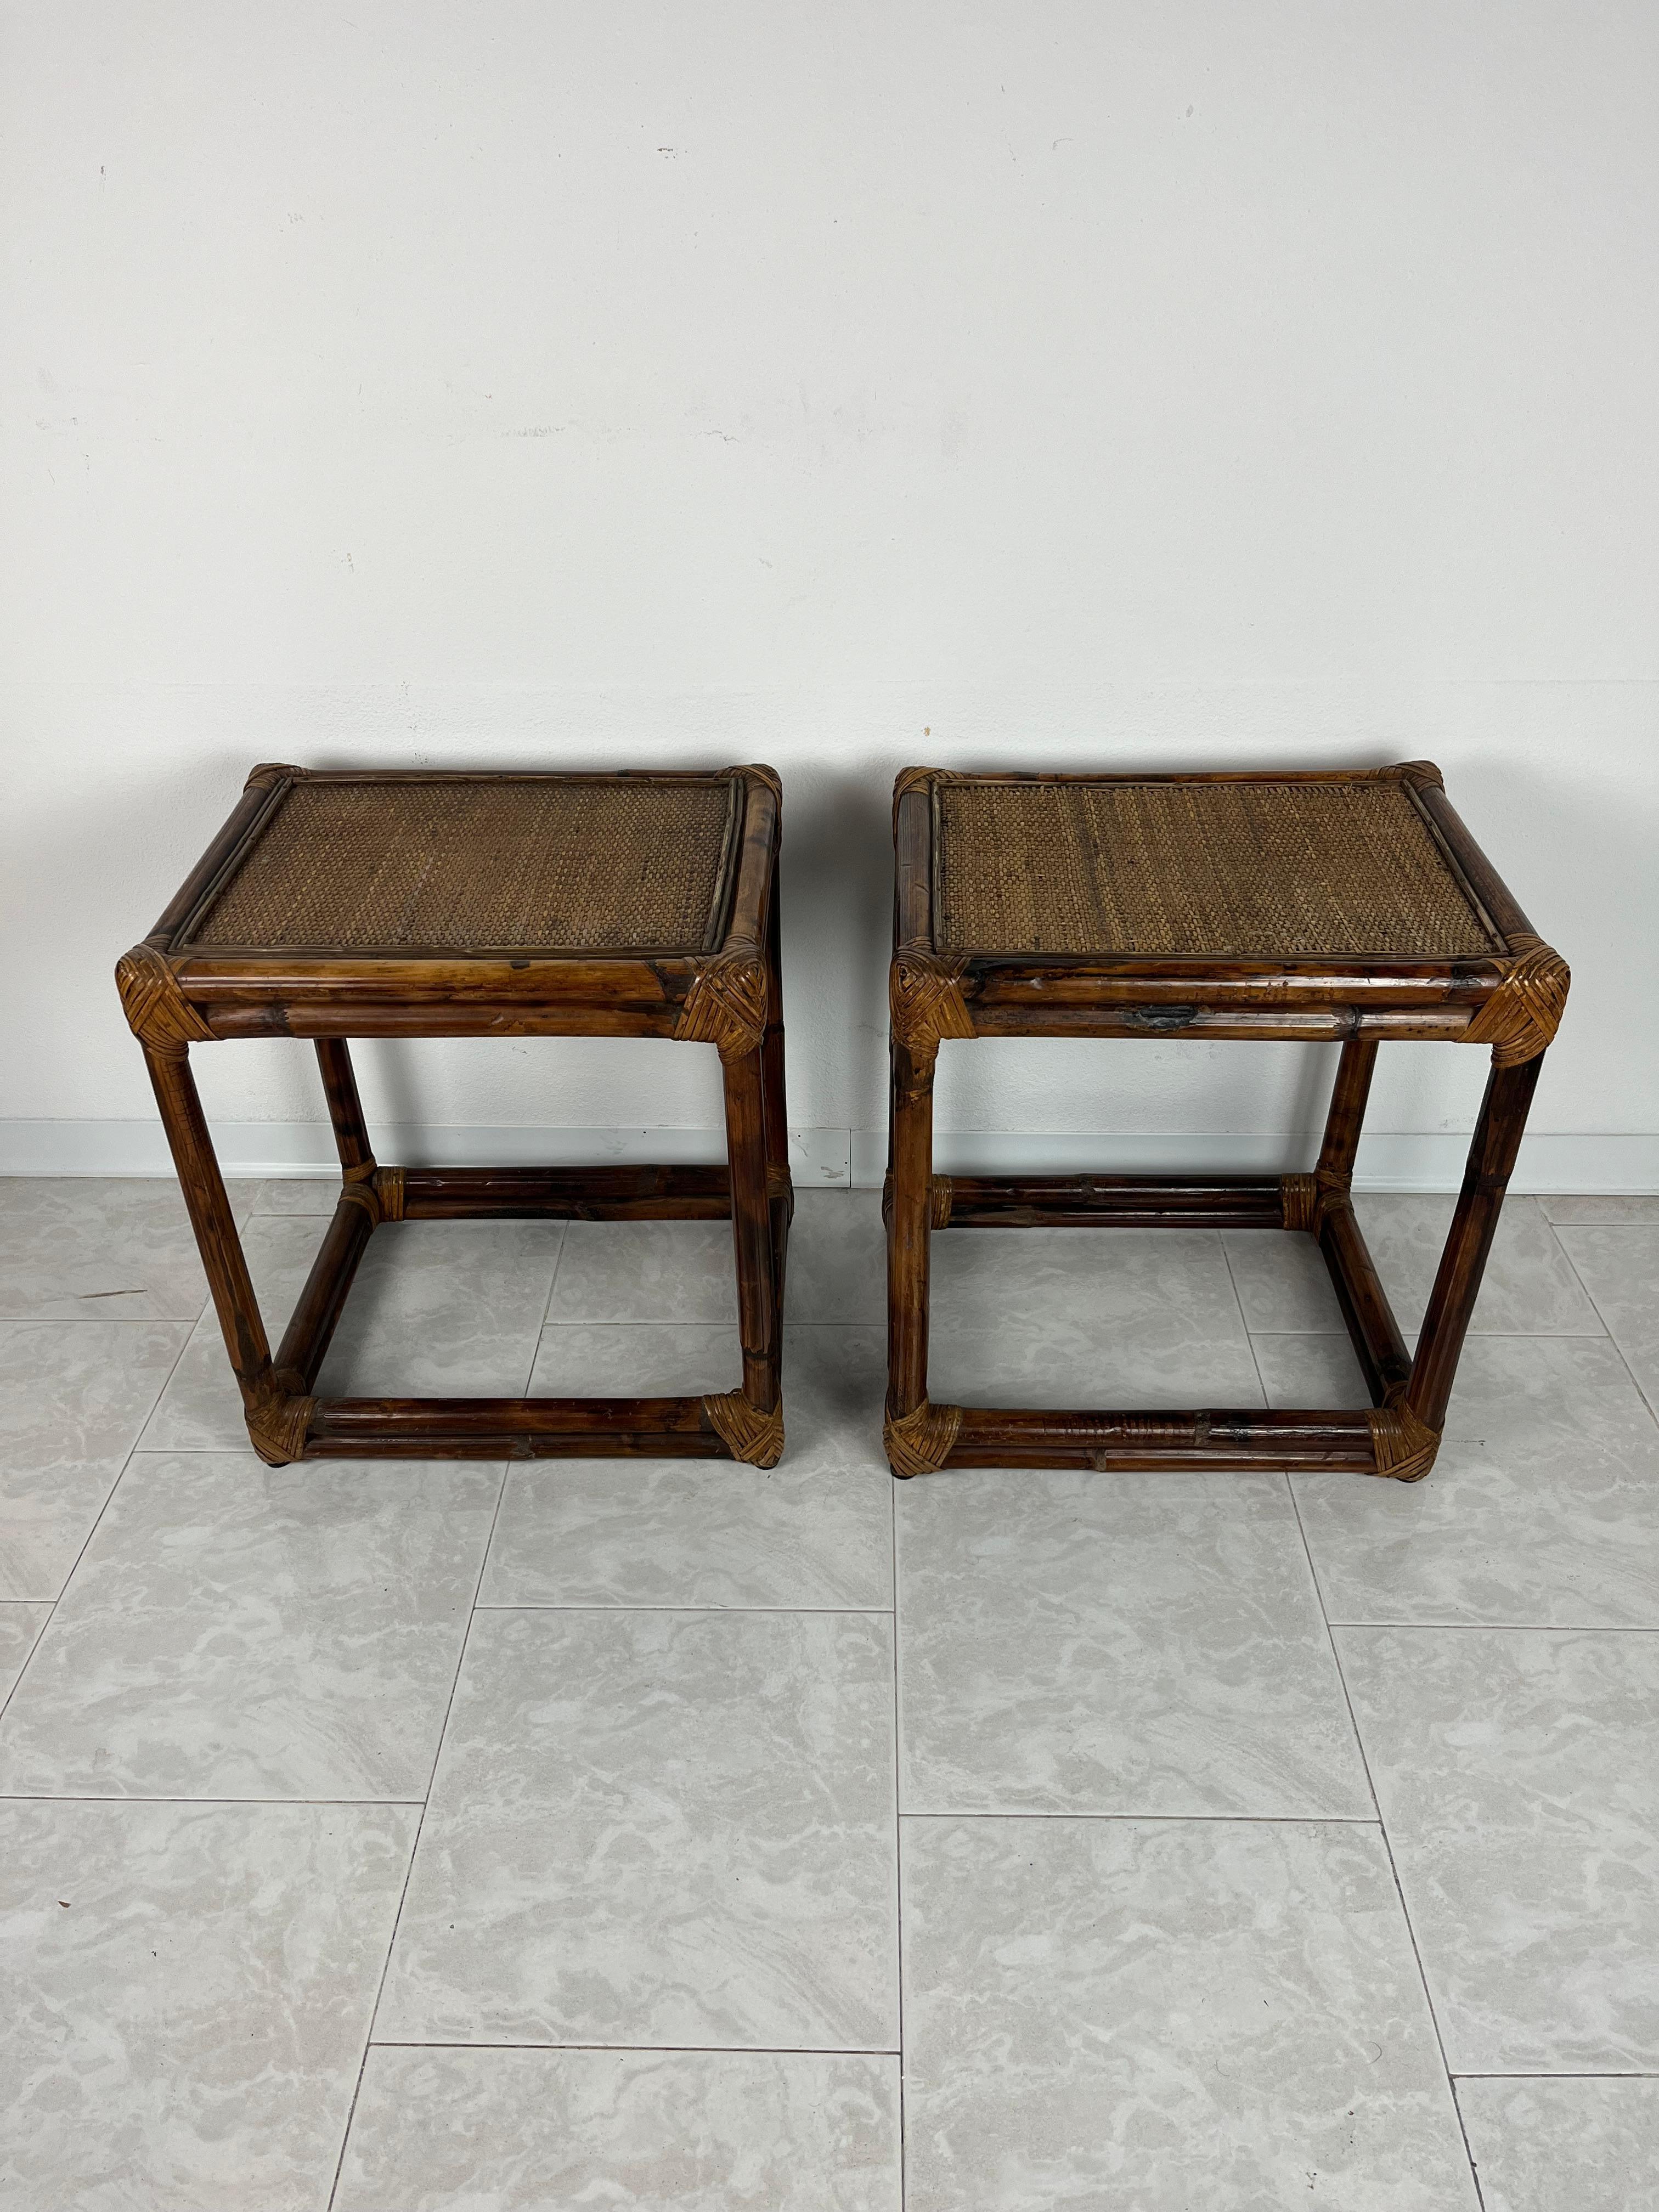 Pair of Bamboo Bedside Tables, Italy, 1960s For Sale 2